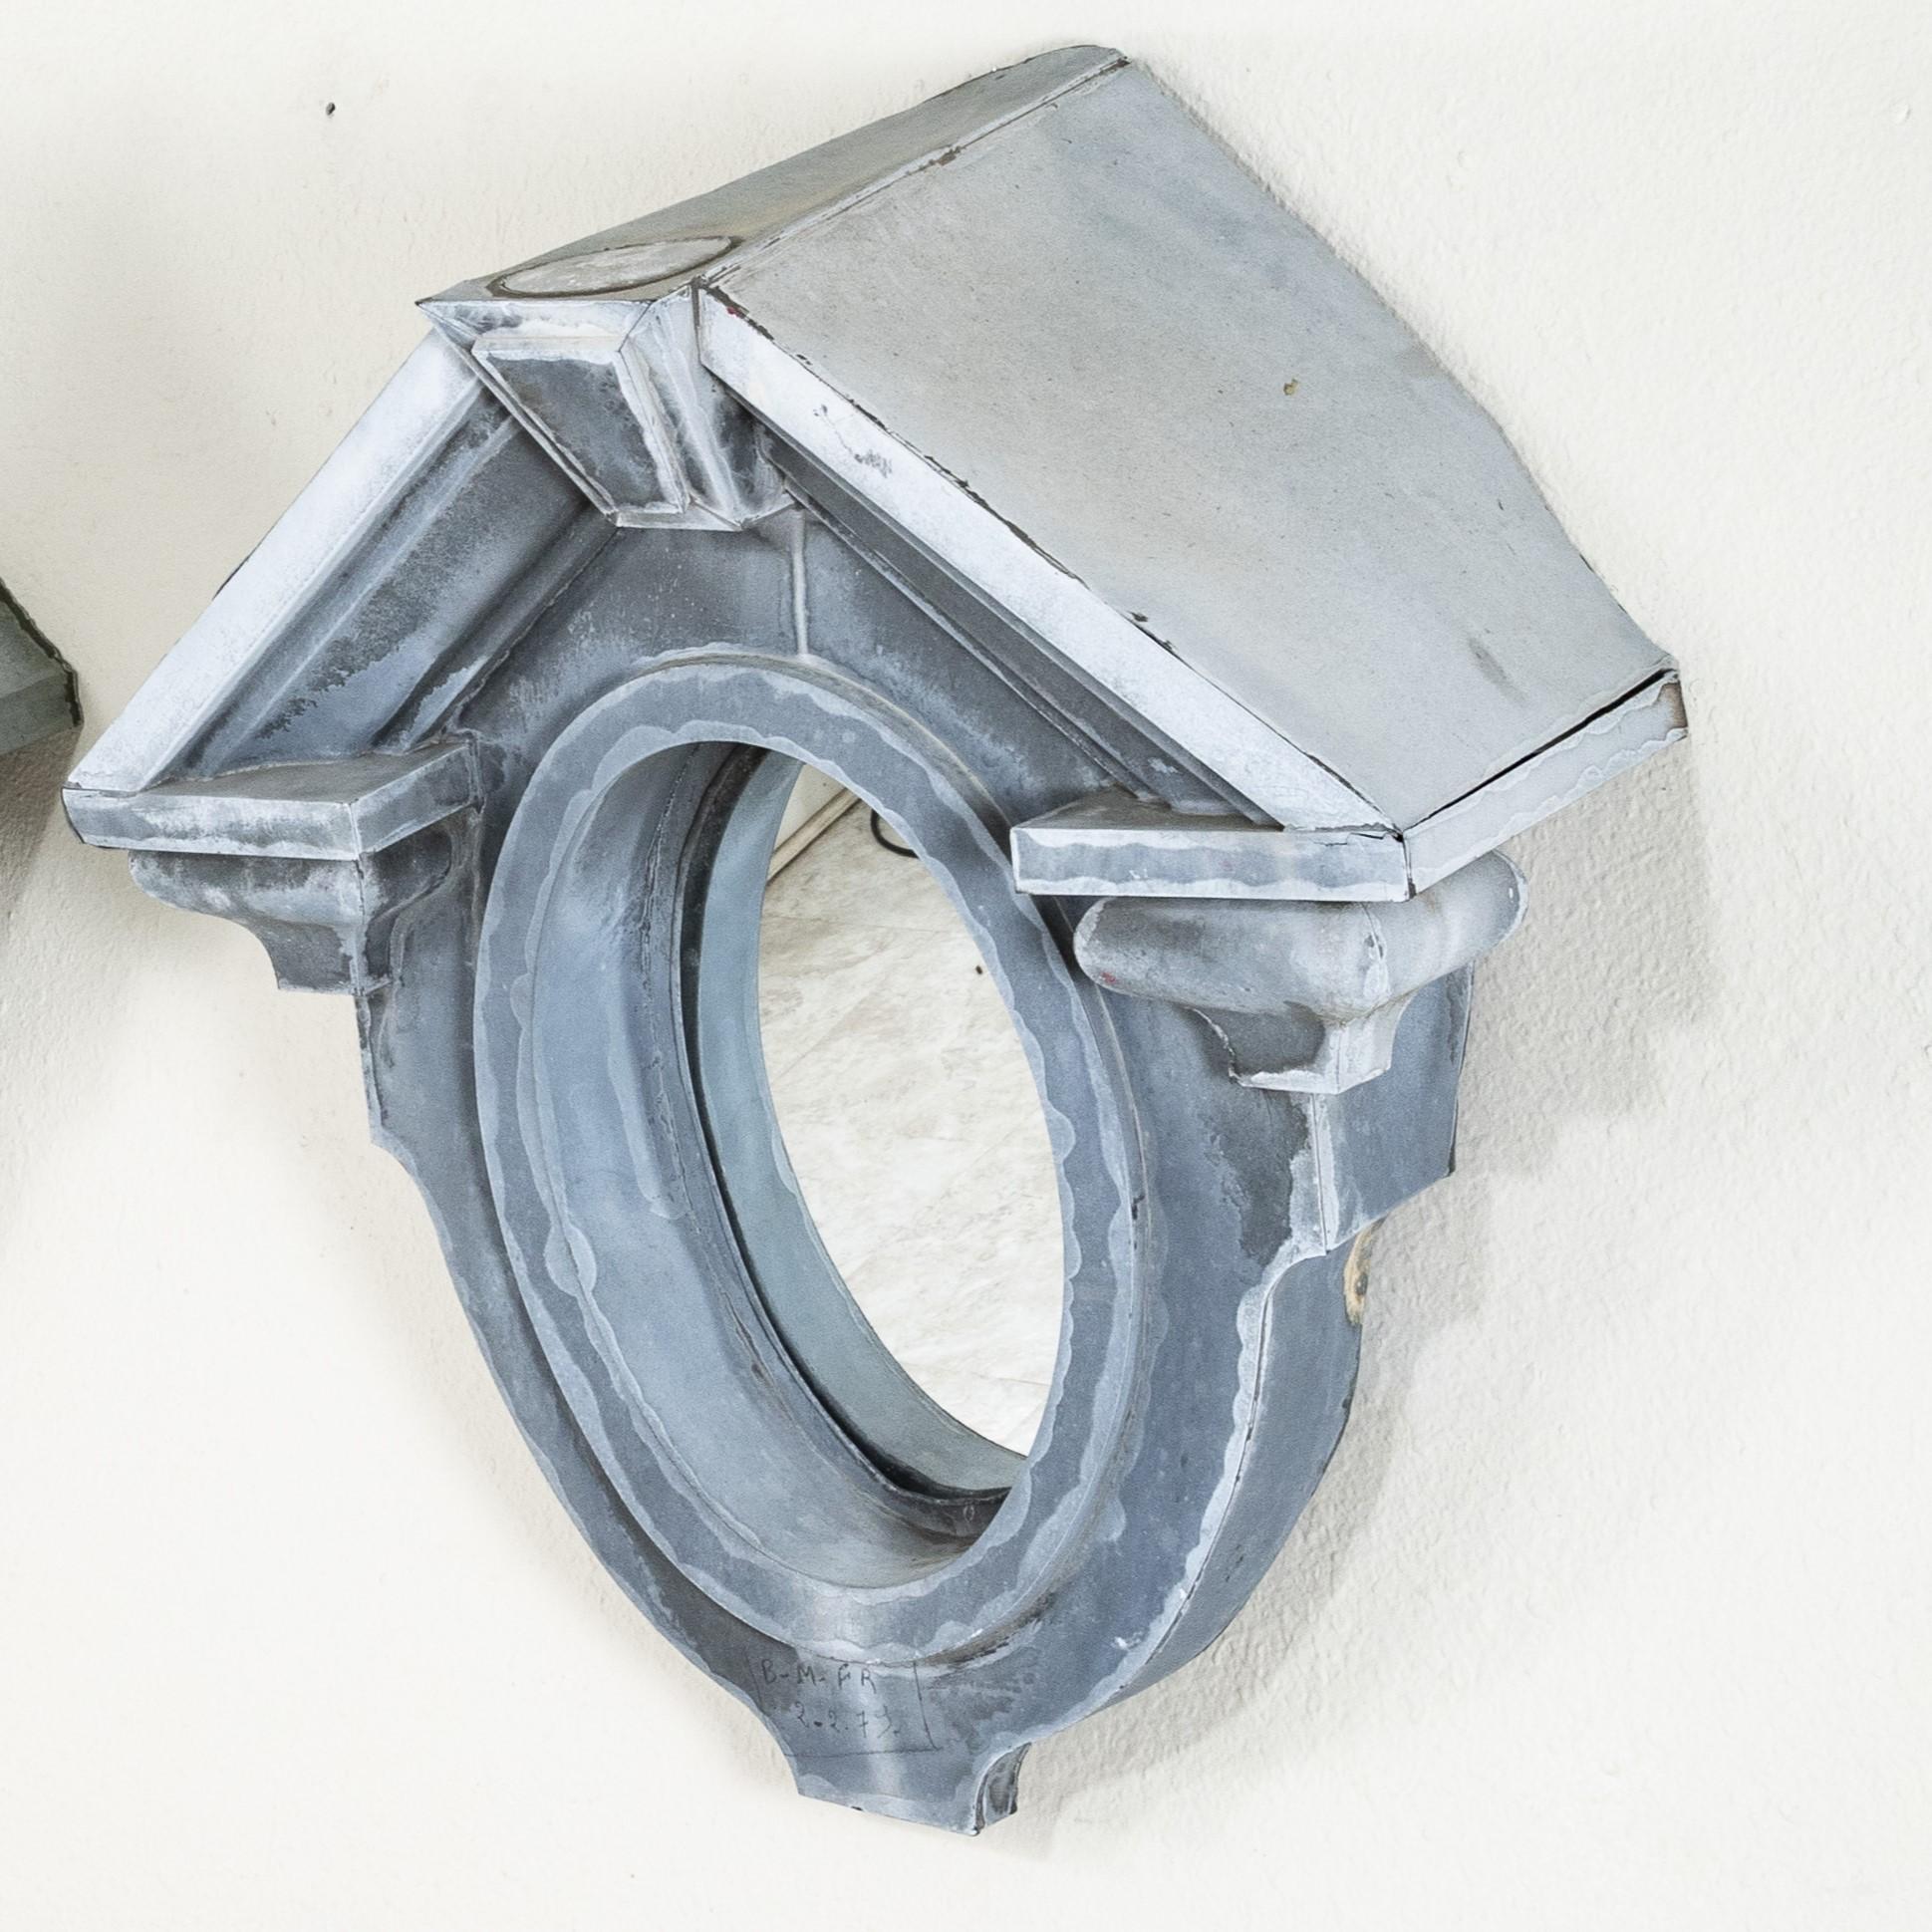 This nineteenth century zinc bull's eye window, called an Oeil de Boeuf in French, was originally a dormer window in a mansard roof of a Normandy manor house. At 34 inches in height, with its classic pediment style roof and interior mirror, this